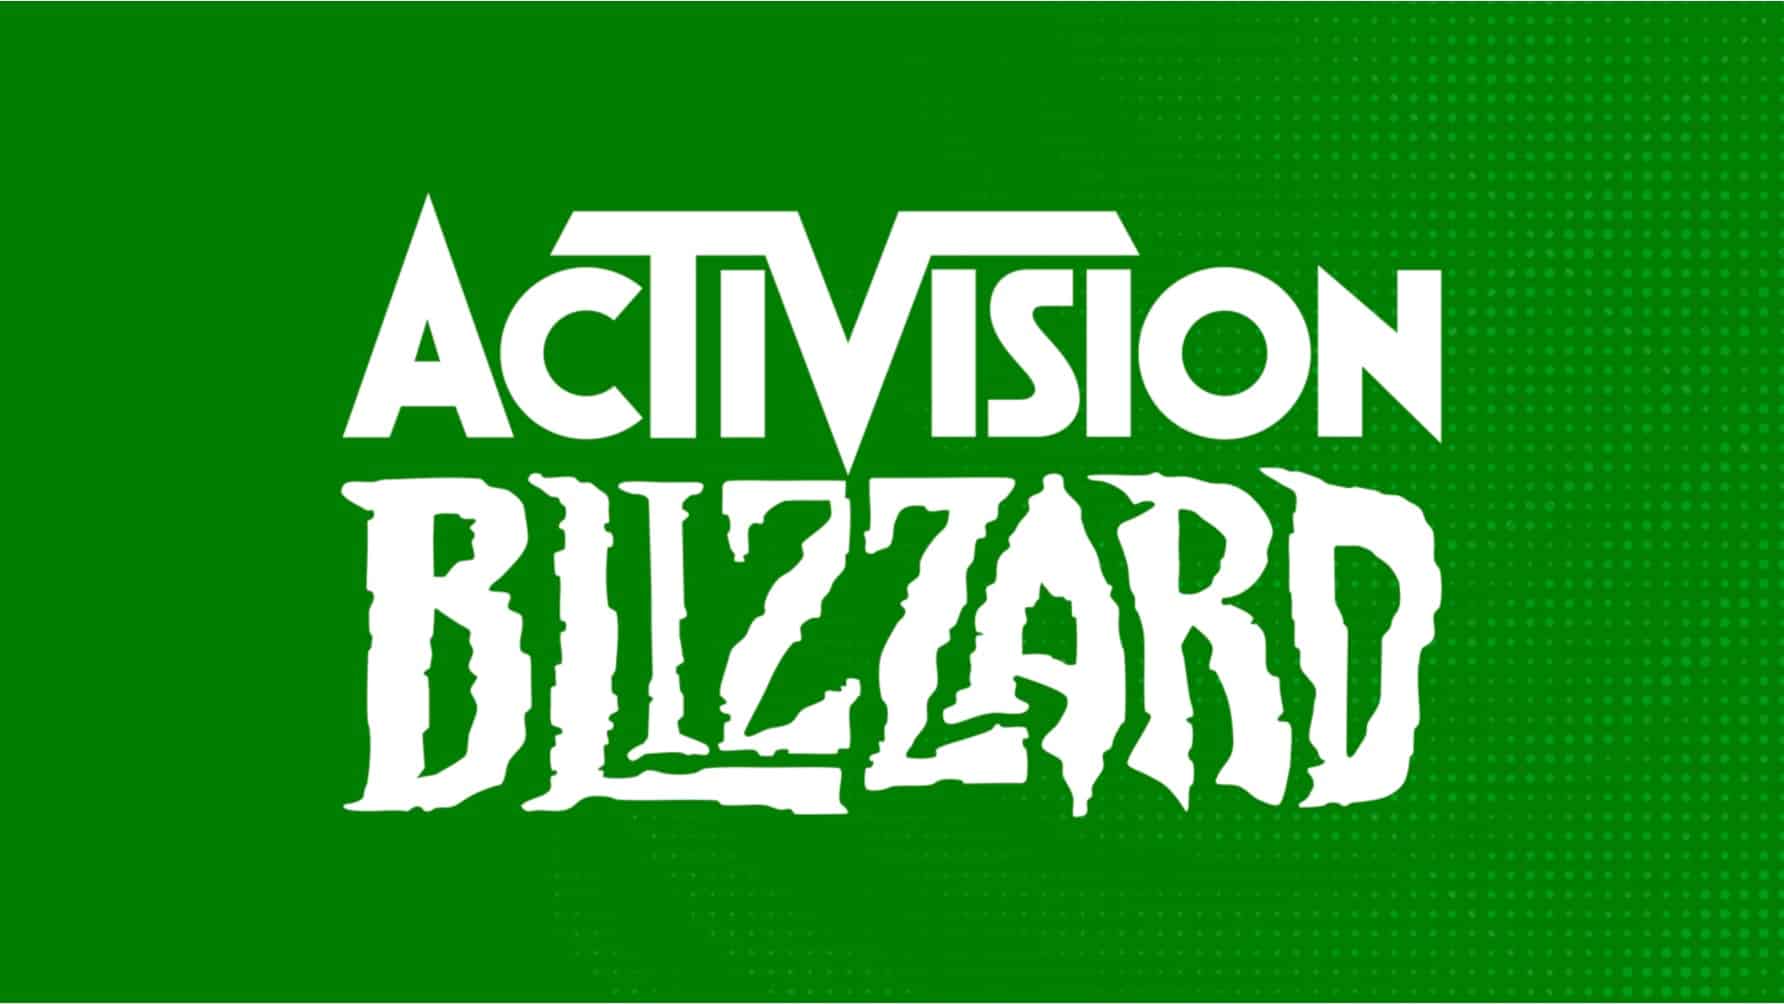 A New Era for Gaming: Xbox buys Activision